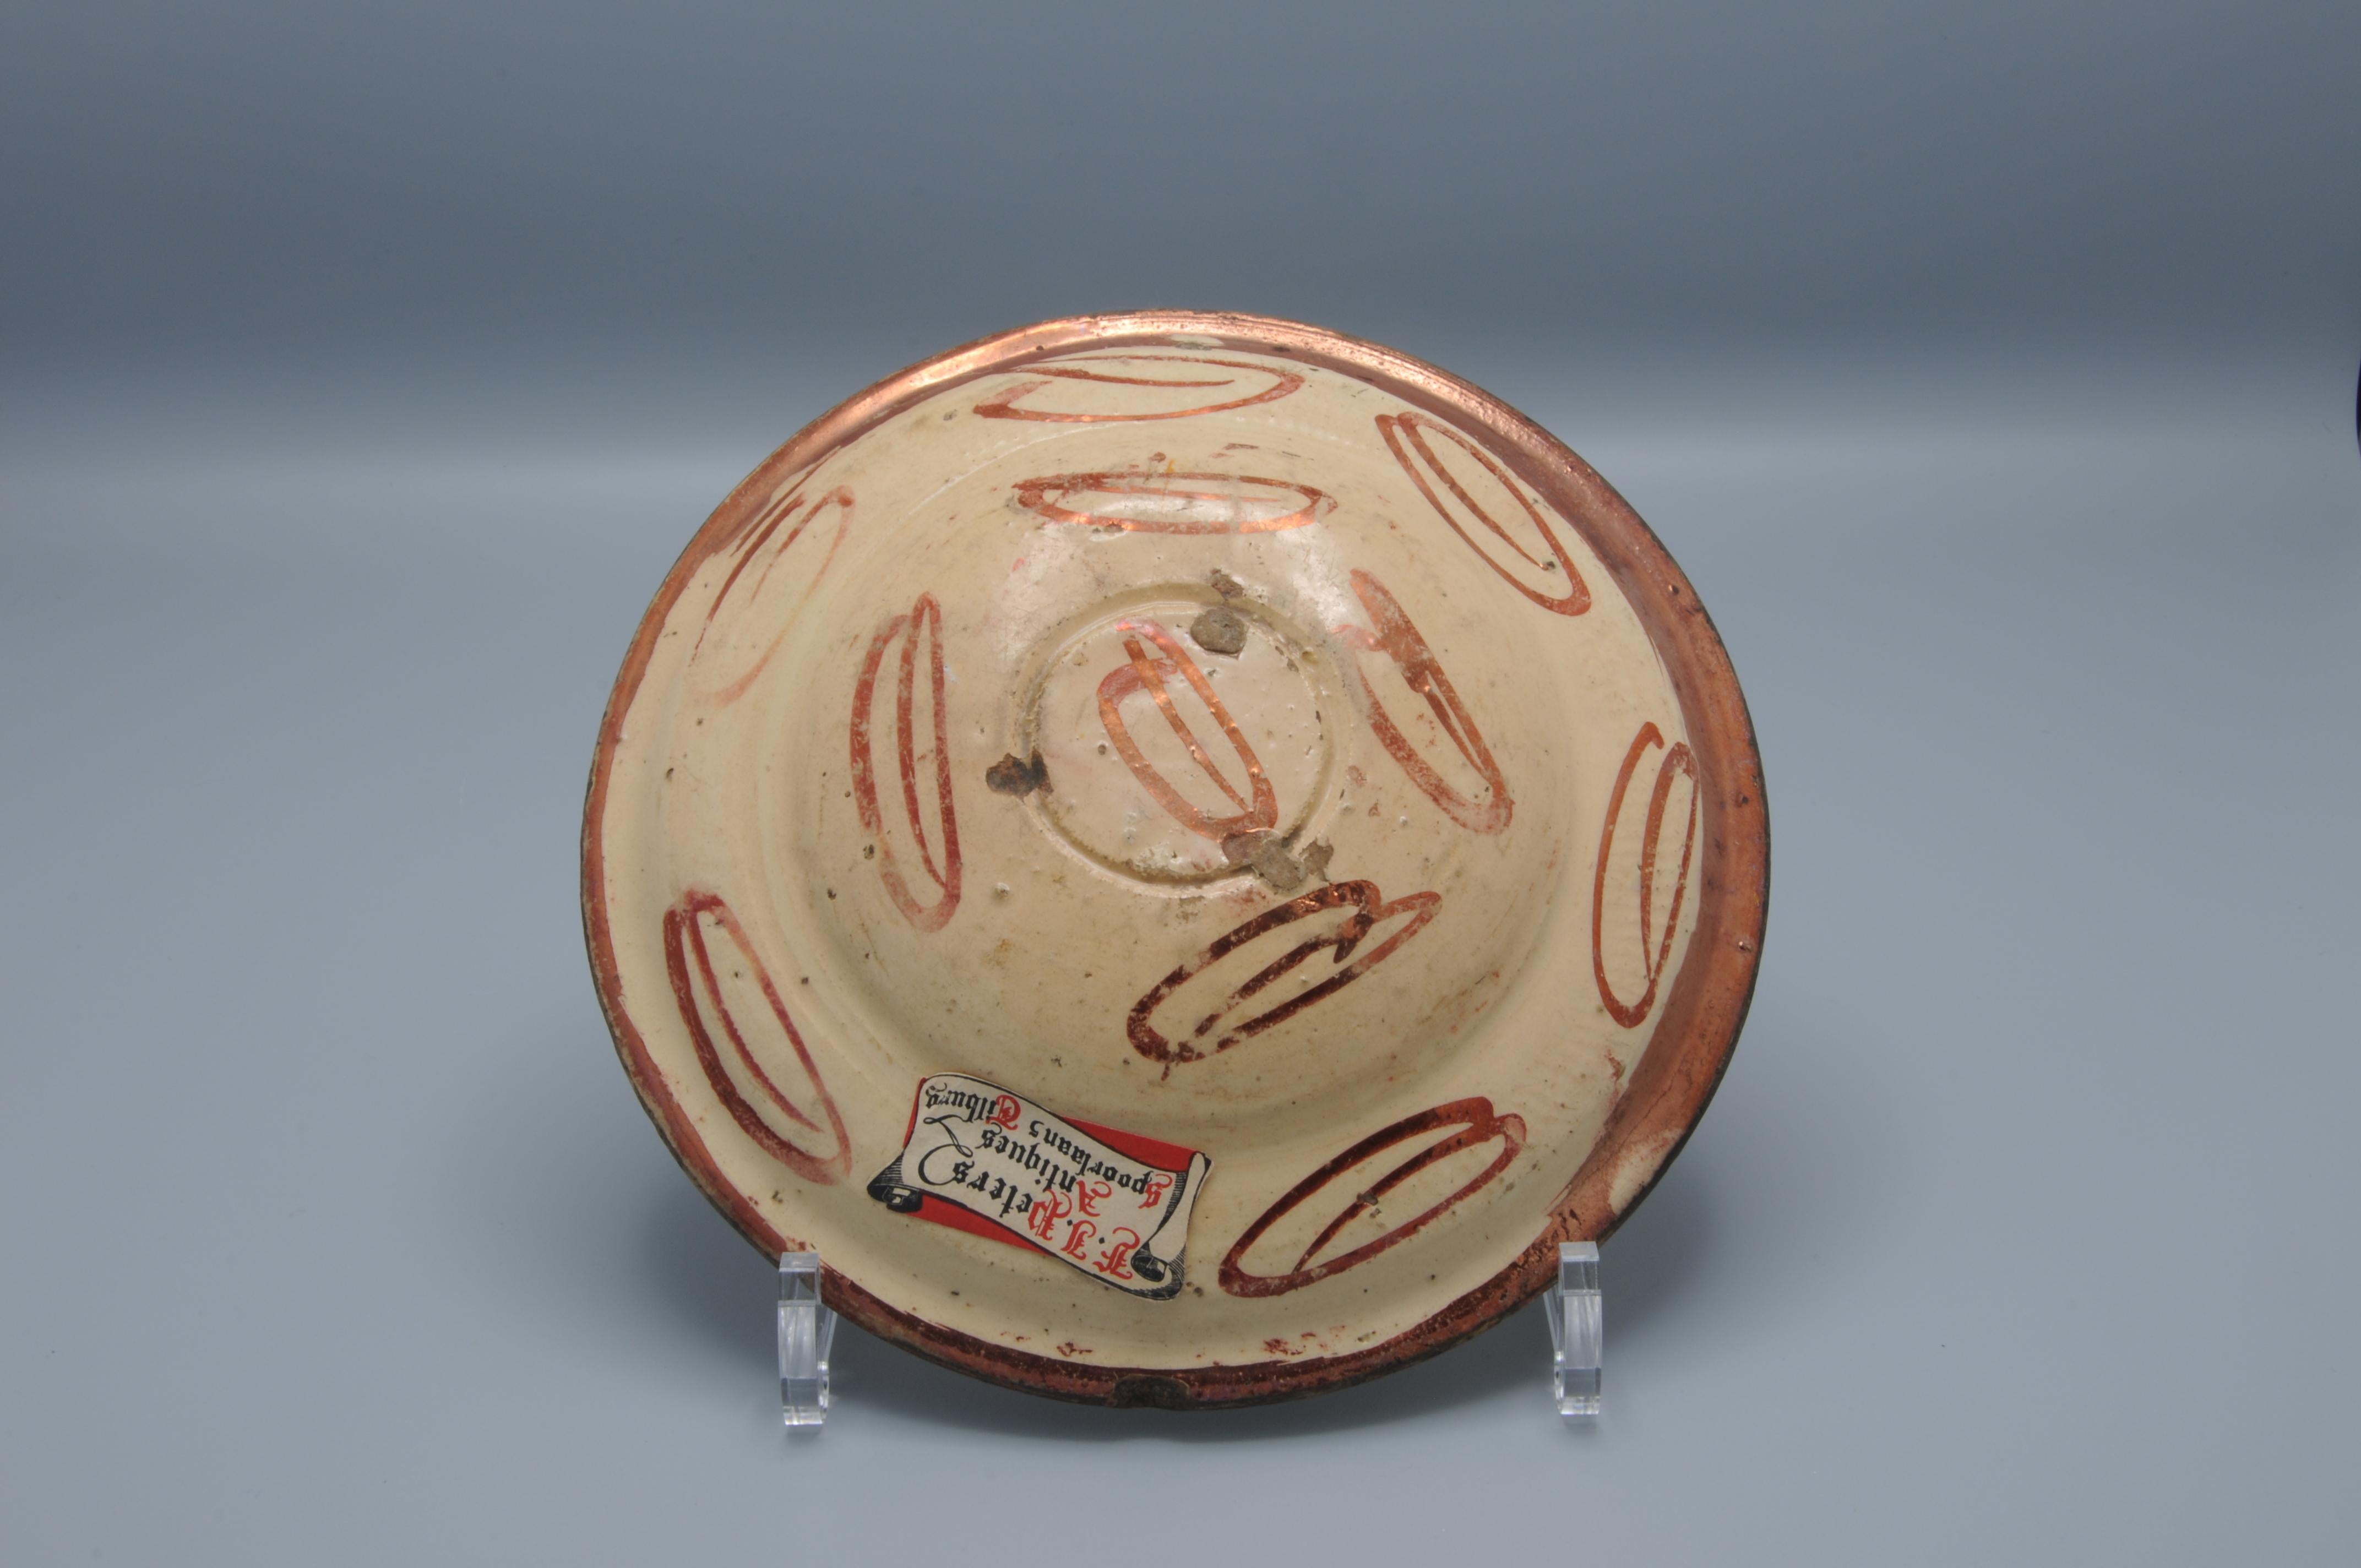 17th century Hispano-Moresque lusterware bowl or charger with a central tree of life motif.
The tin-glazed lusterware produced at Manises near Valencia, Muel, and Catalonia shows the passing of Islamic artistic influence into Christian Spain.

In